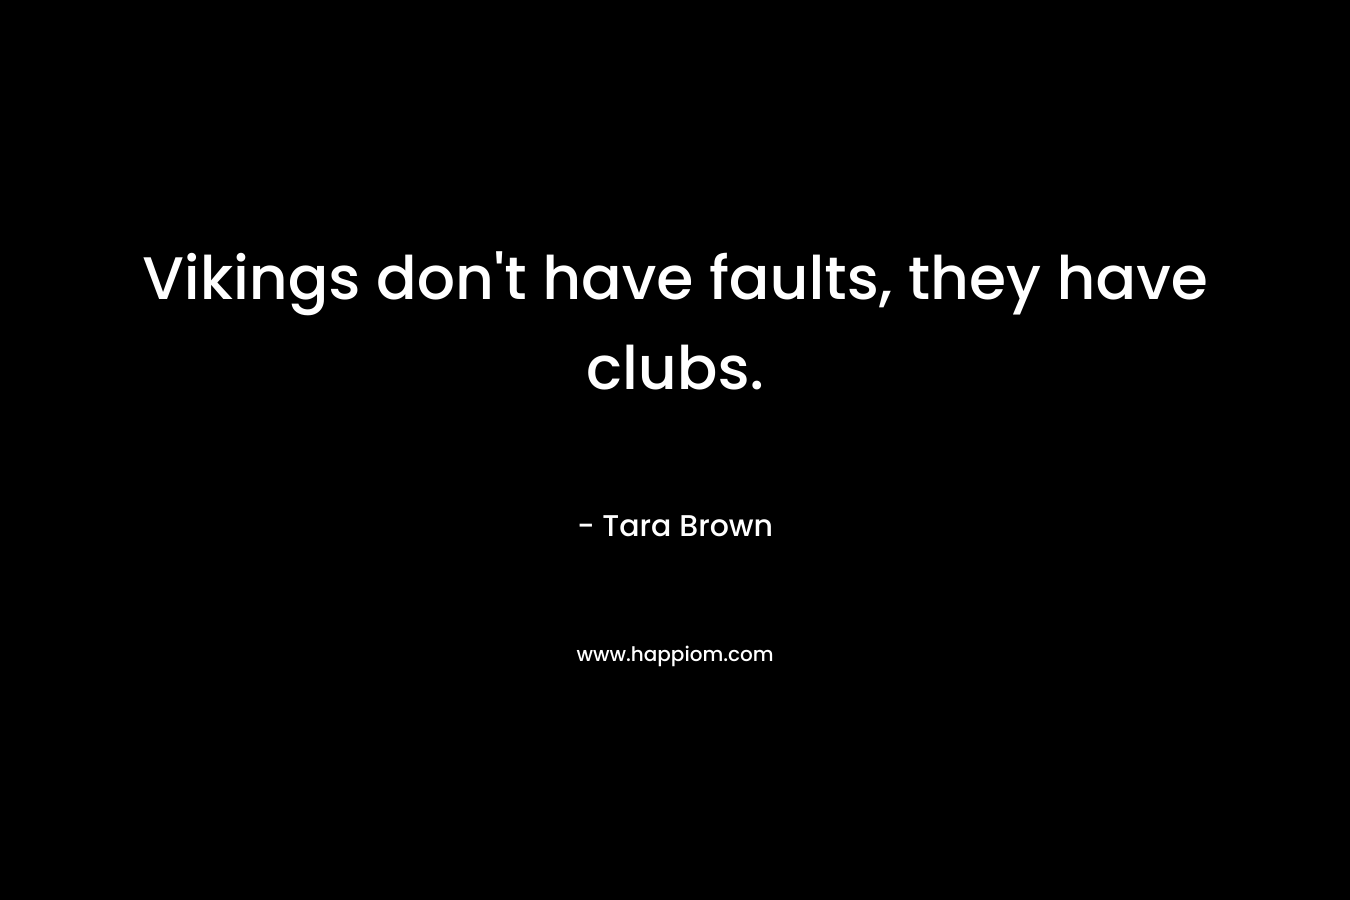 Vikings don't have faults, they have clubs.